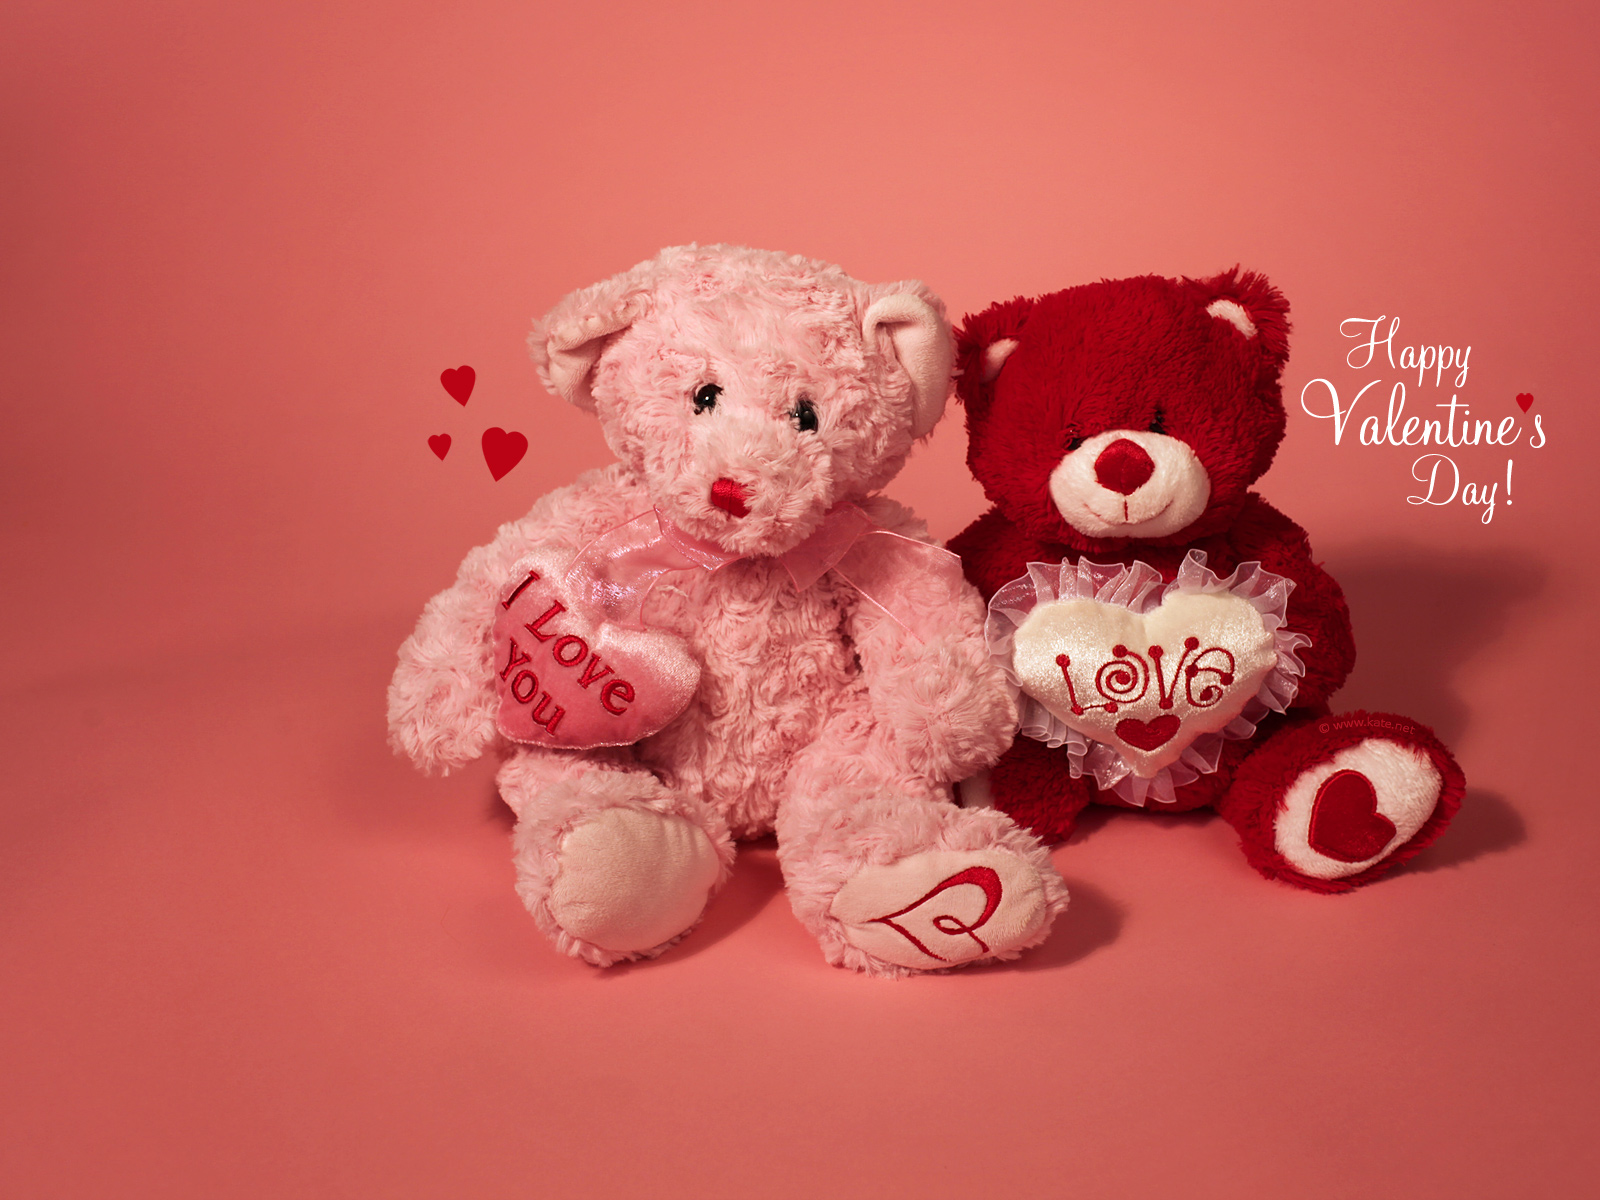 Valentines Day Background Images HD Pictures and Wallpaper For Free  Download  Pngtree